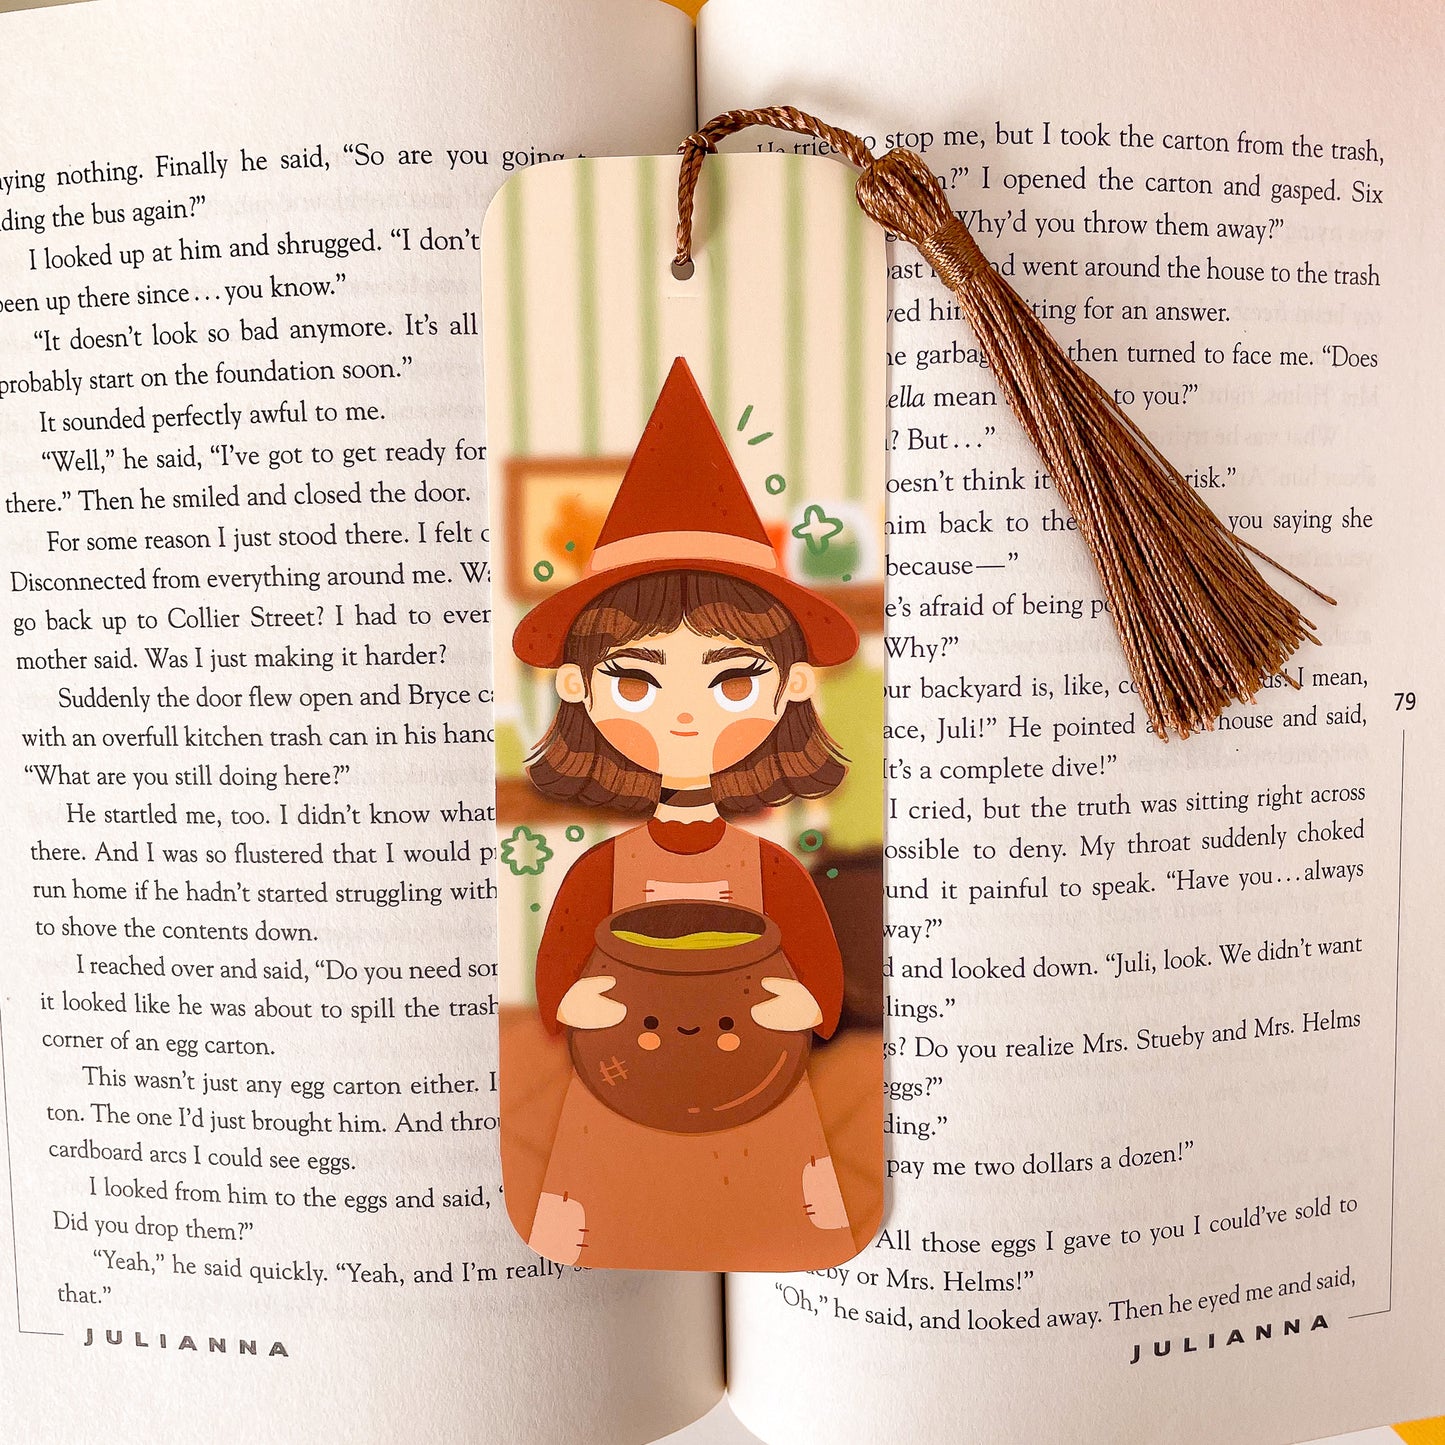 Potions Witch Bookmark